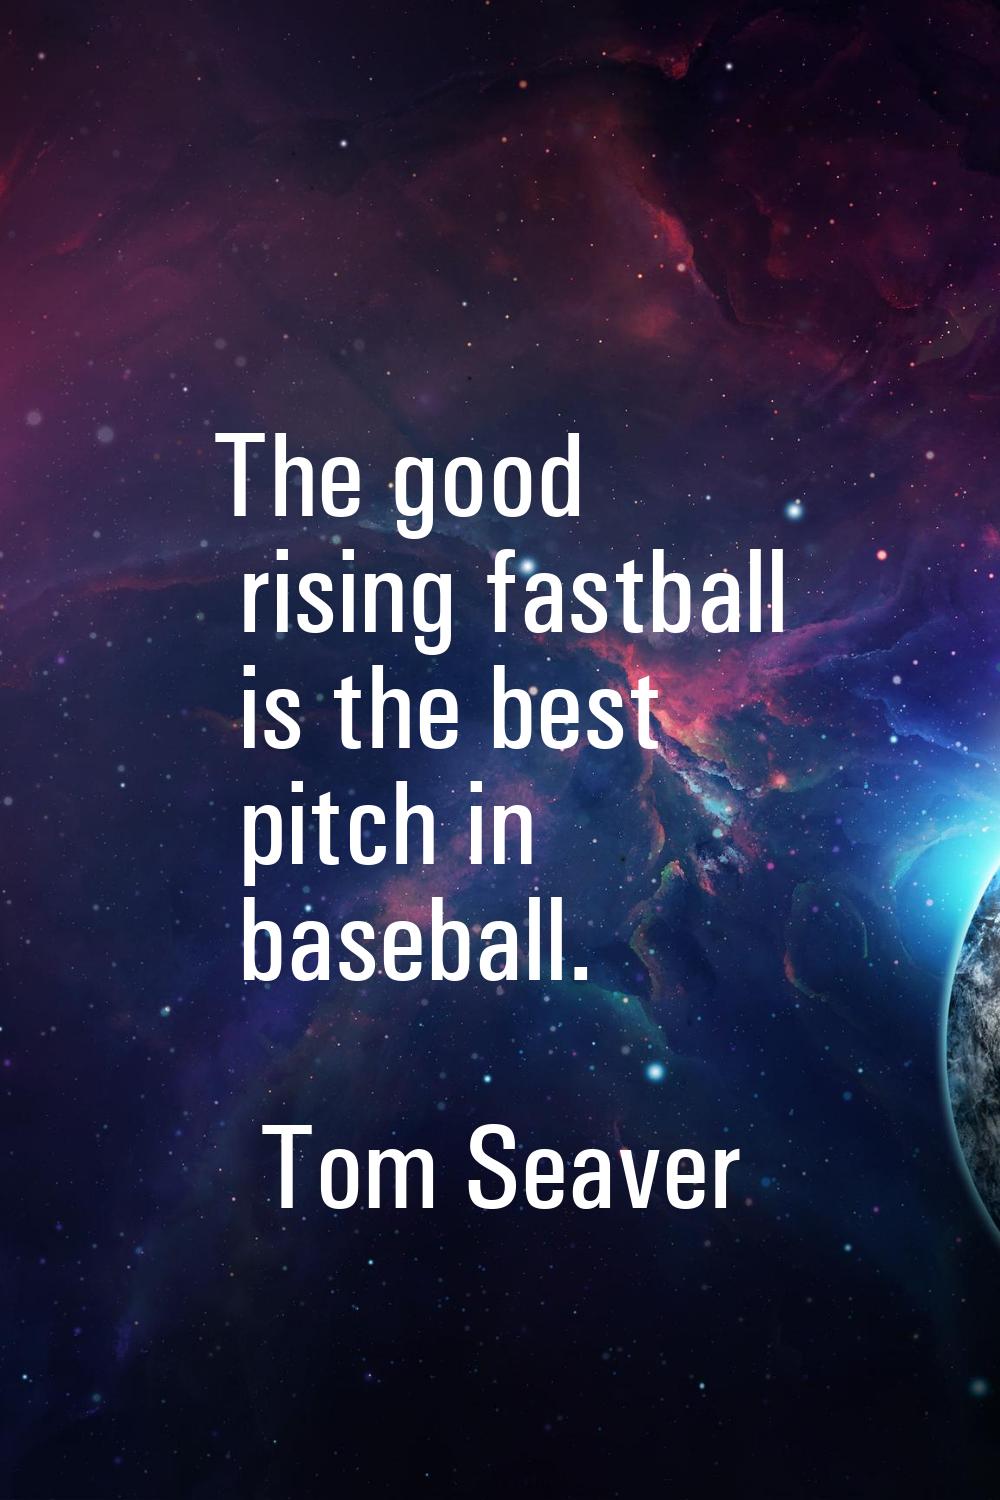 The good rising fastball is the best pitch in baseball.